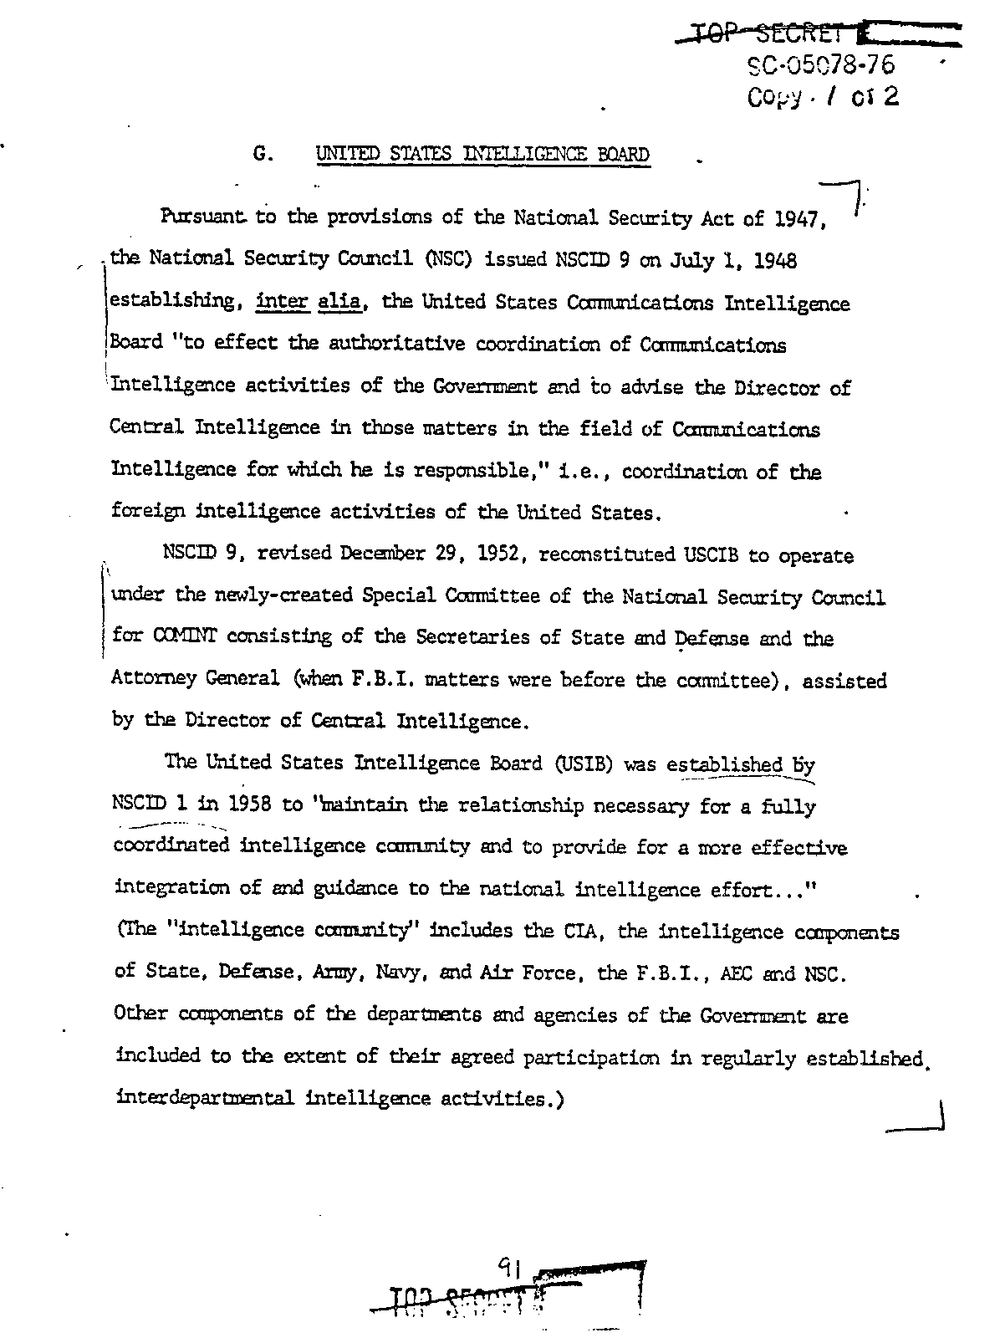 Page 99 from Report on Inquiry Into CIA Related Electronic Surveillance Activities